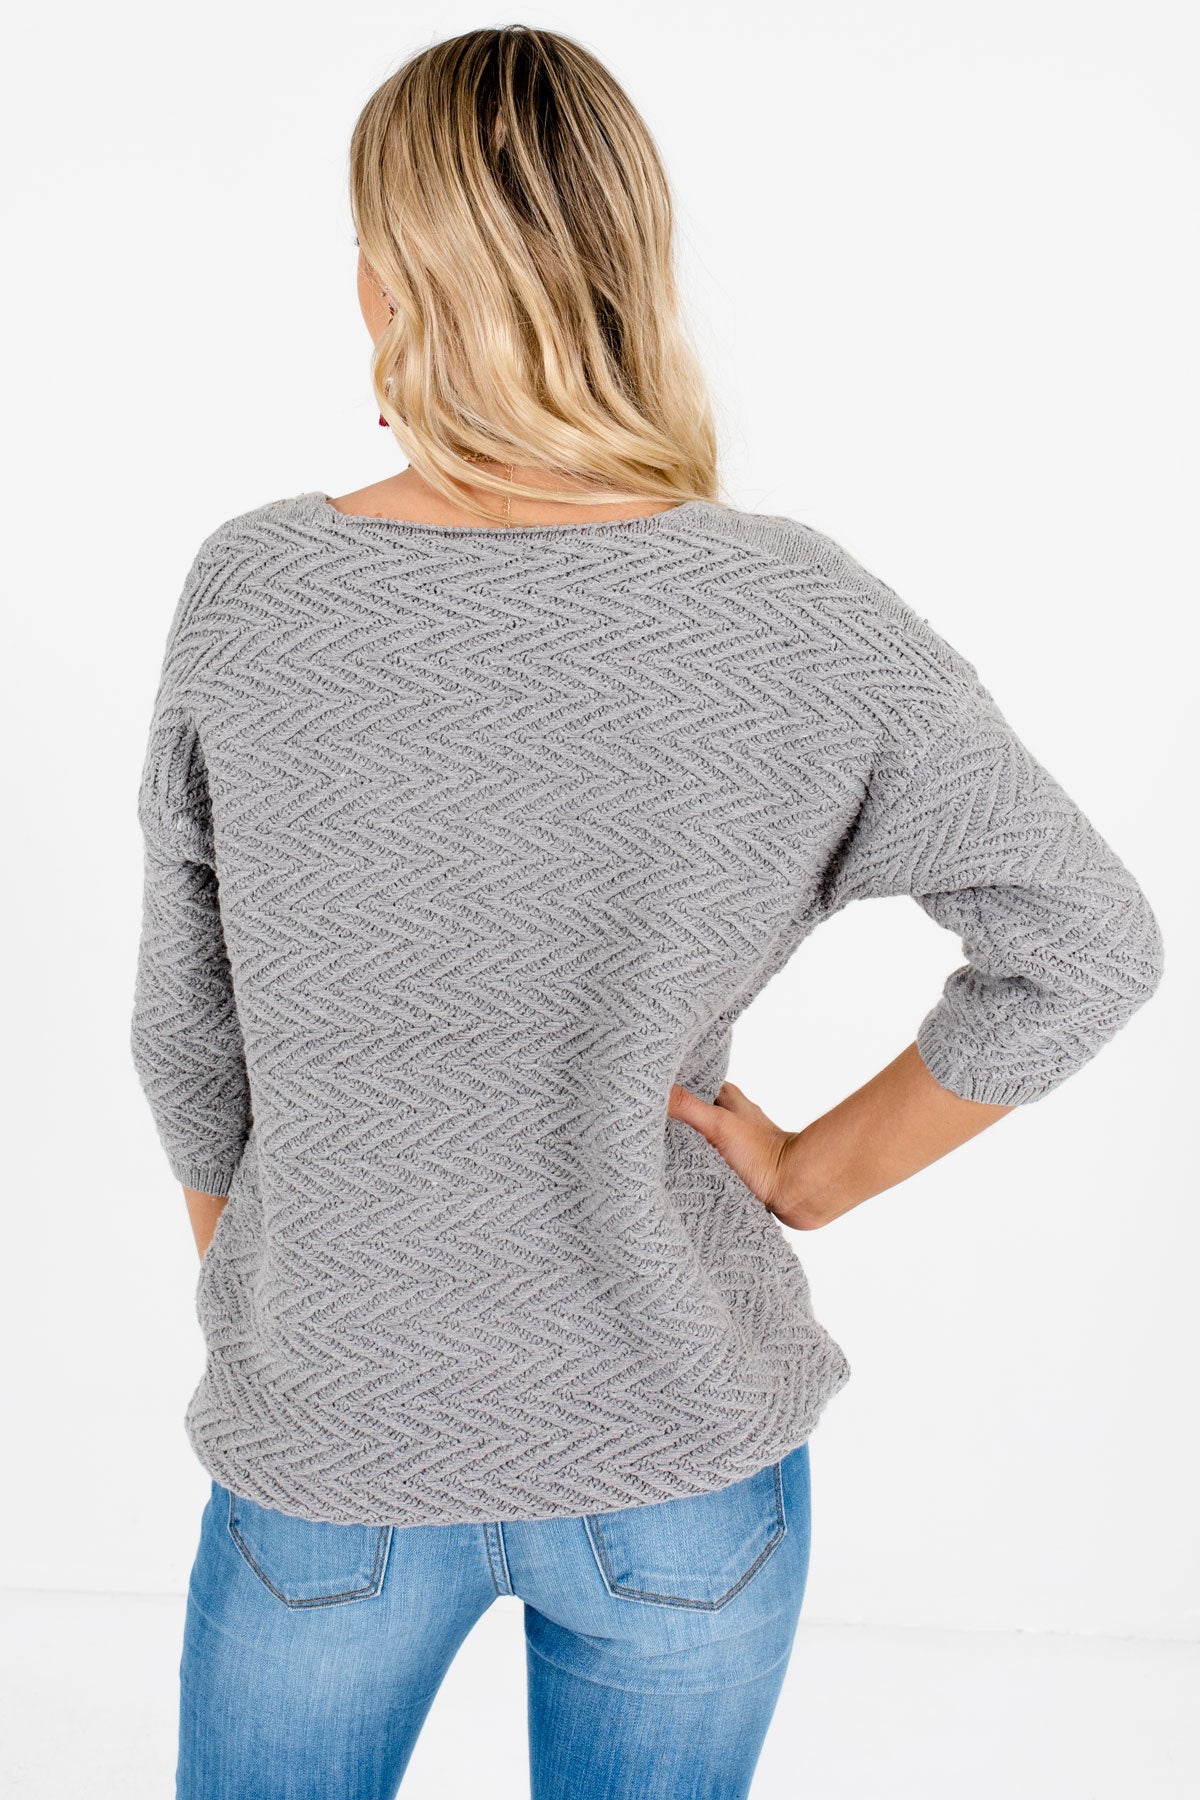 Women's gray 3/4 Length Sleeve Boutique Sweaters